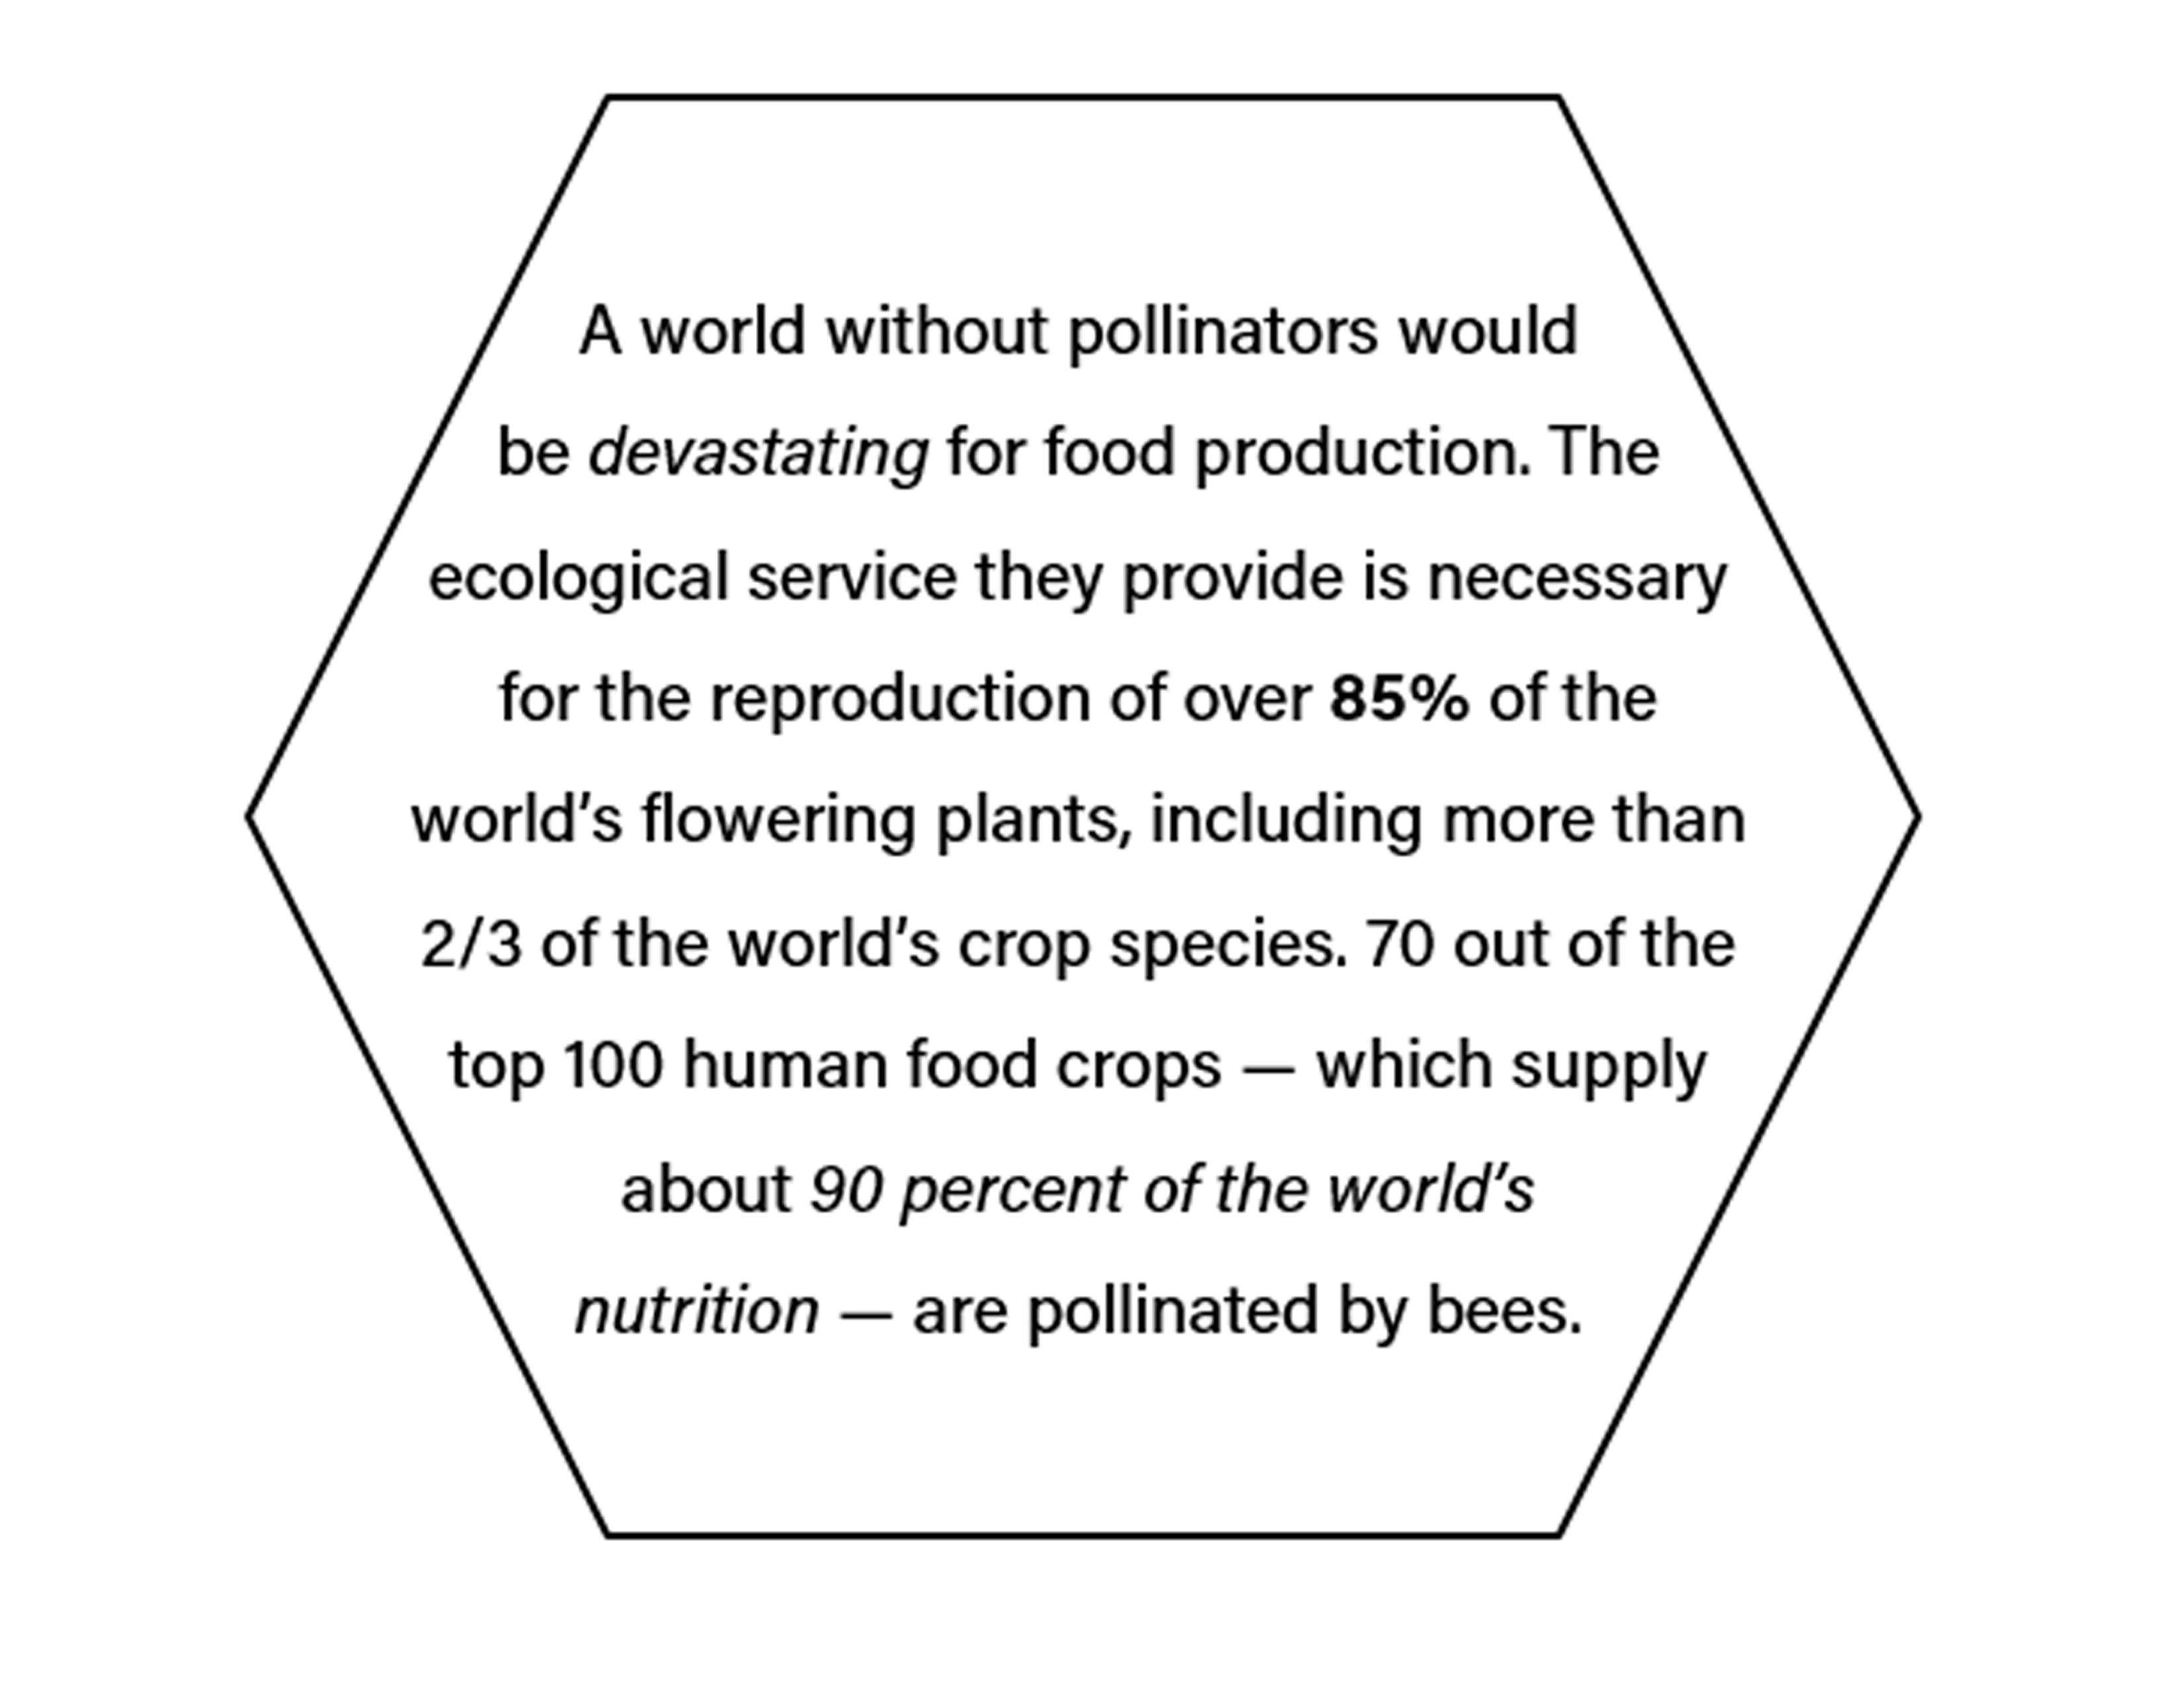 A world without pollinators would be devastating for food production. The ecological service they provide is necessary for the reproduction of over 85% of the world’s flowering plants, including more than 2/3 of the world’s crop species. 70 out of the top 100 human food crops — which supply about 90 percent of the world’s nutrition — are pollinated by bees.